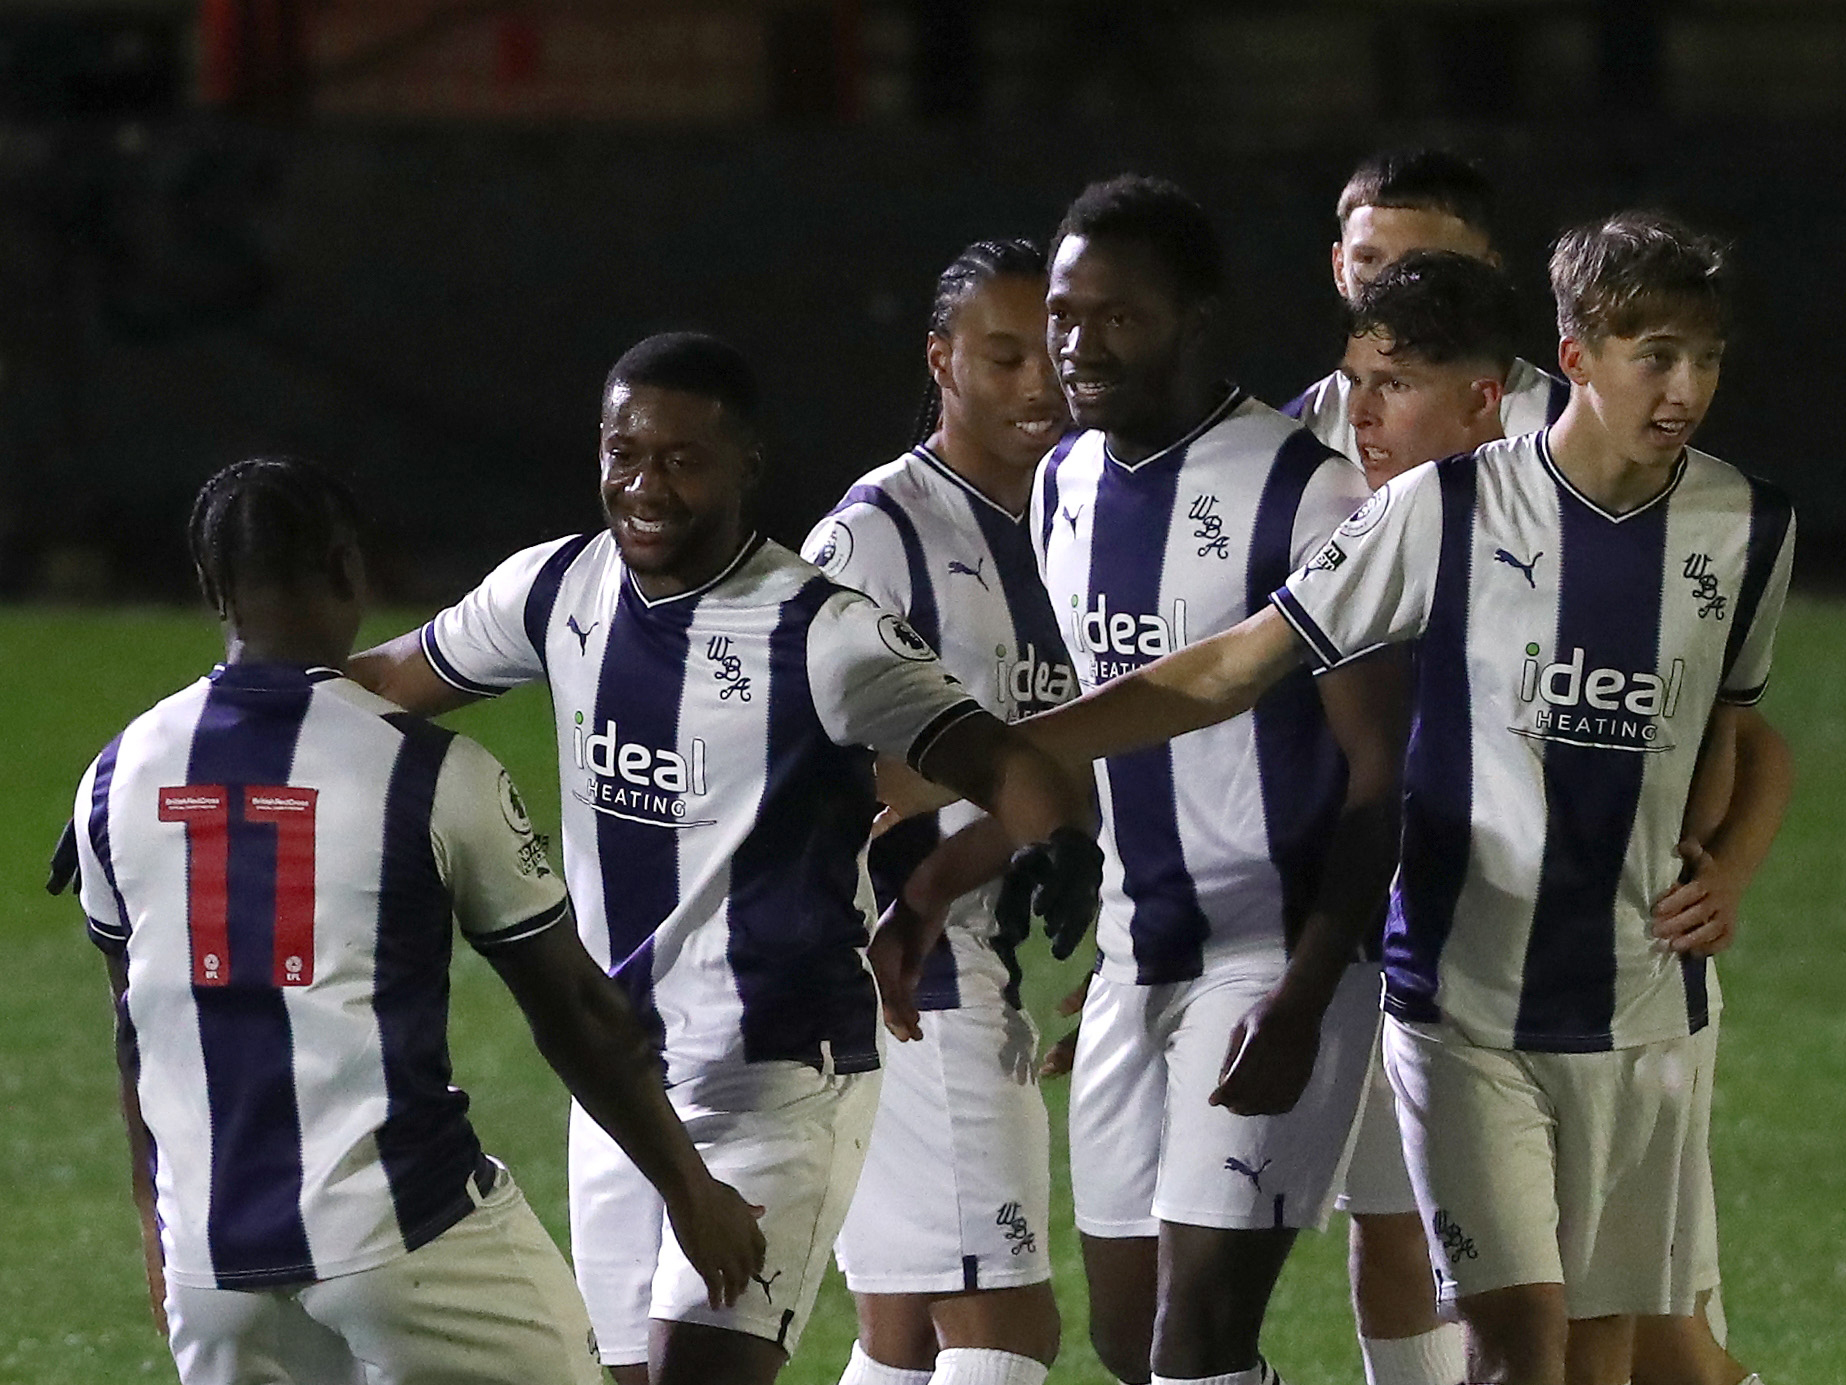 Albion PL2 players celebrate after their first goal against Stoke